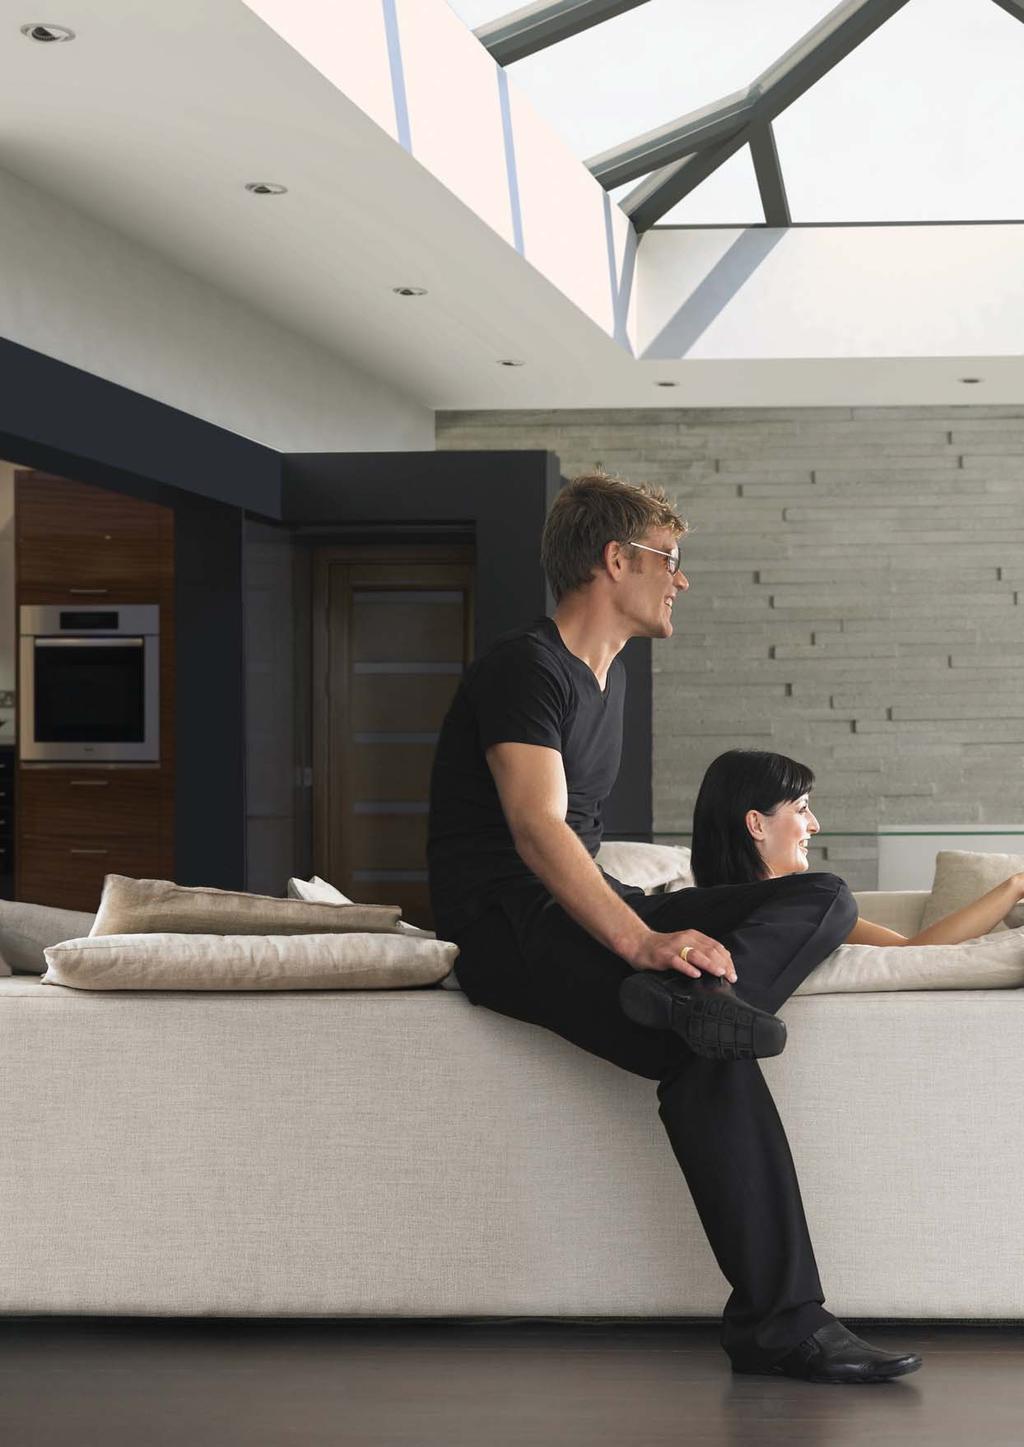 Ultrasky creates the perfect living space whether you re entertaining, relaxing with your family, or having a cosy night in.